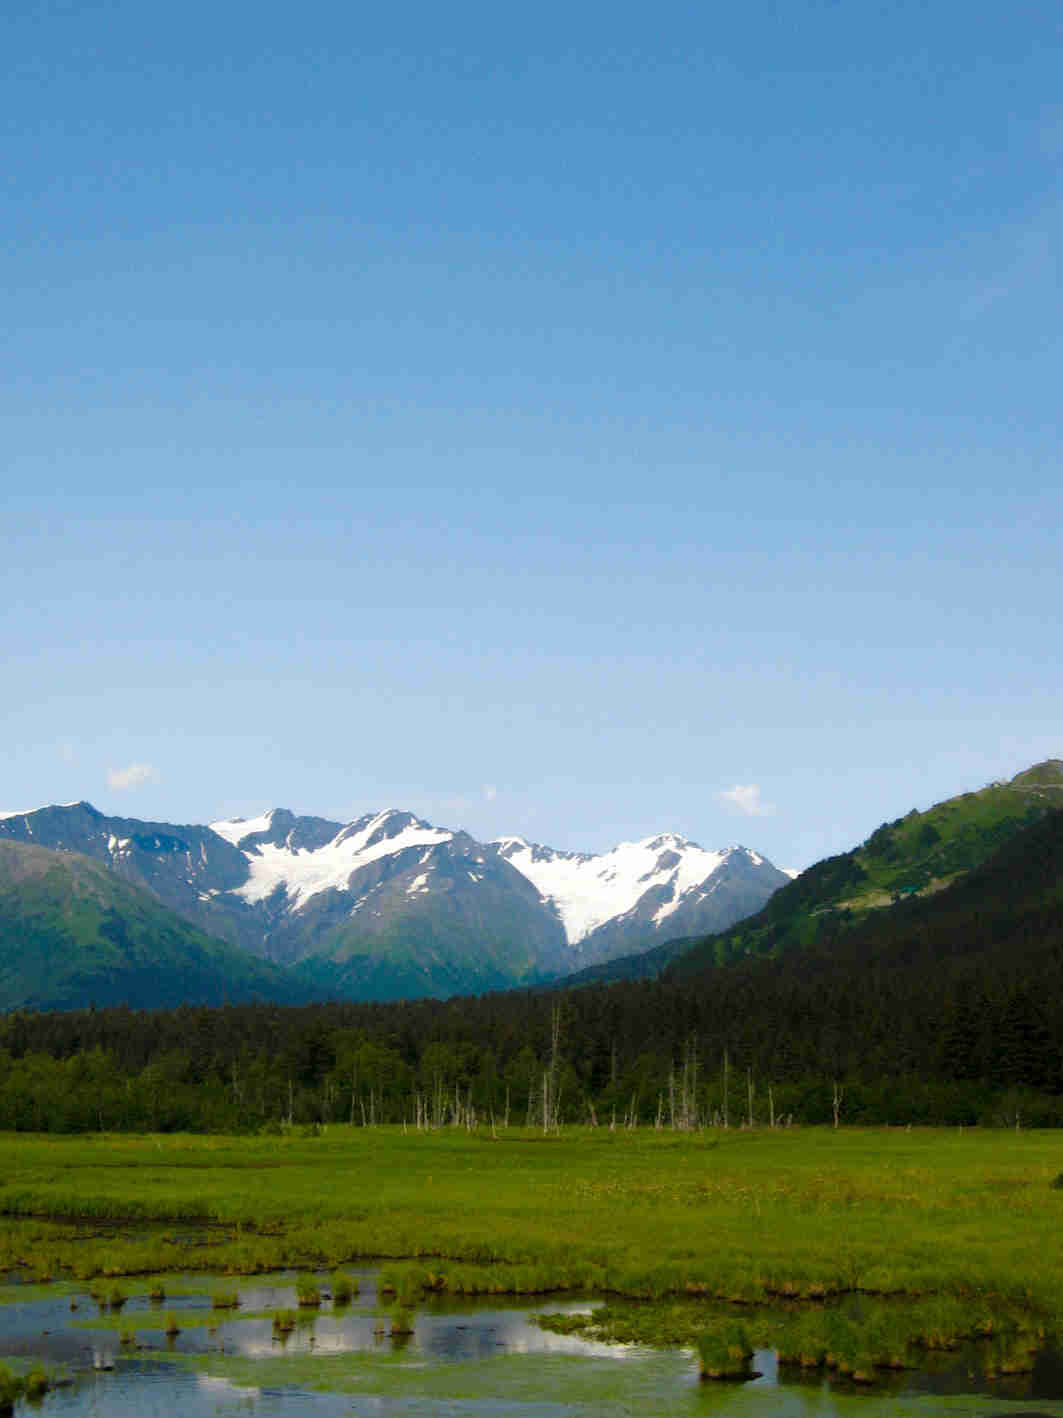 A marshy Alaskan field with trees behind it, and snowy mountains in the background